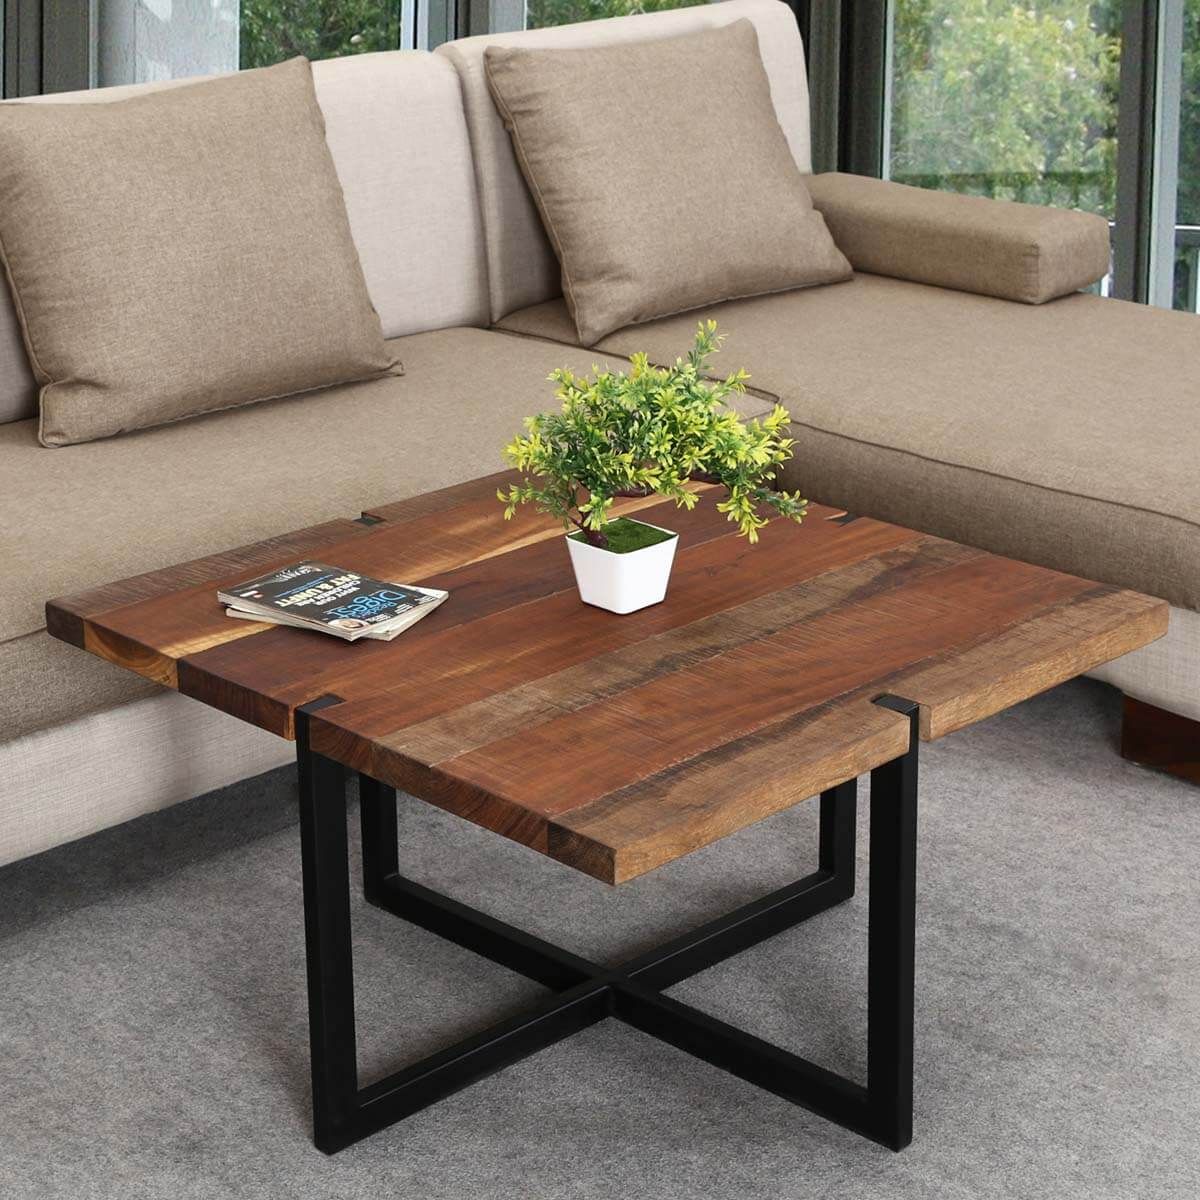 Suffolk Simplicity Reclaimed Wood Square Industrial Coffee Throughout Barnwood Coffee Tables (View 9 of 15)